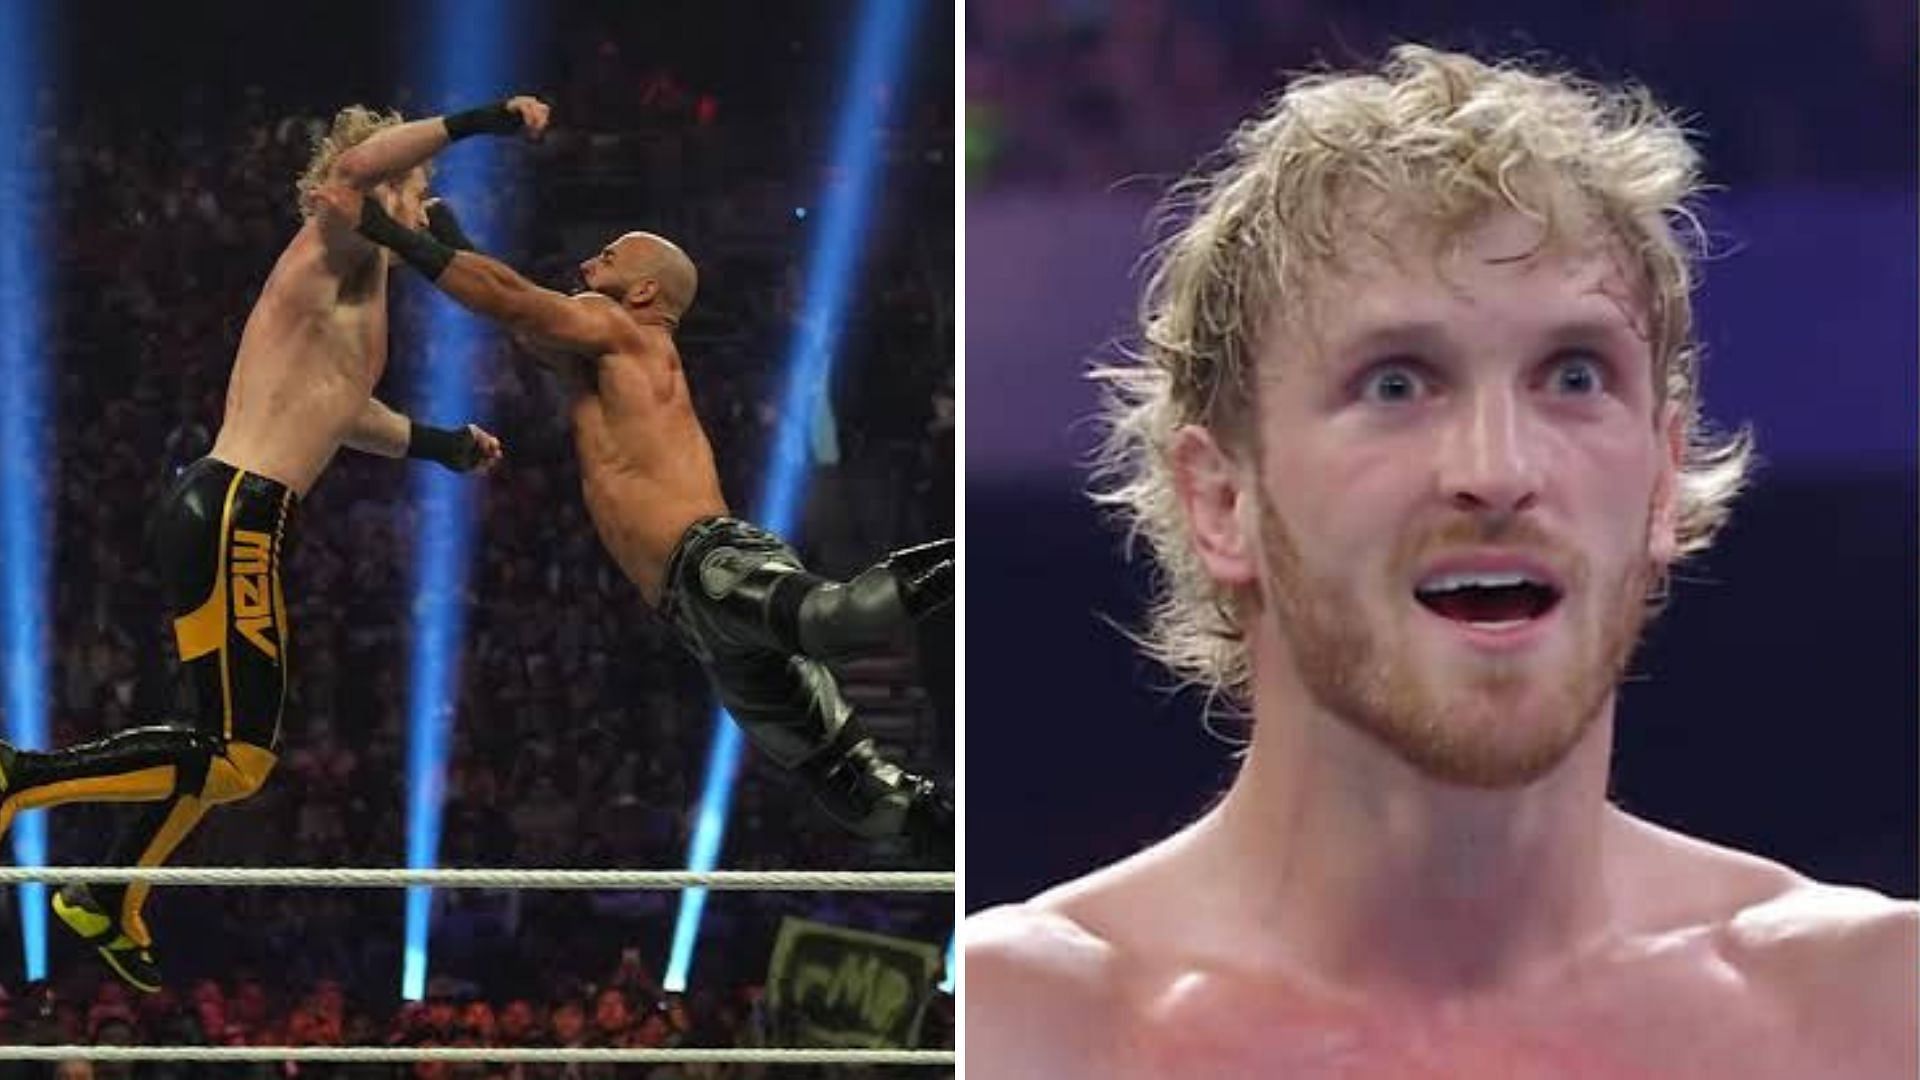 Logan Paul and Ricochet left fans stunned at Royal Rumble.